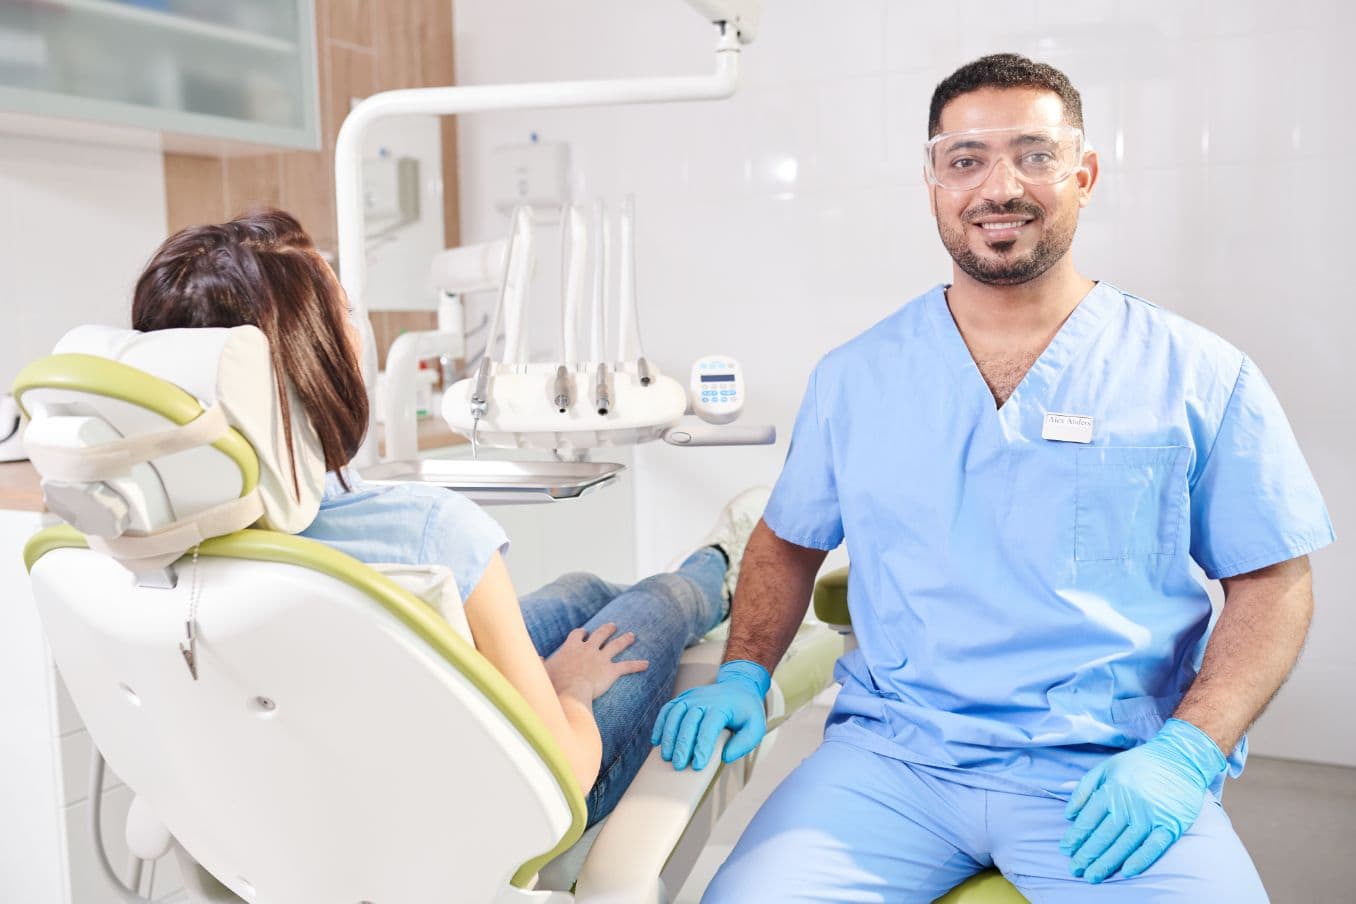 Motivational Reasons For Choosing Dentistry As A Professional Career